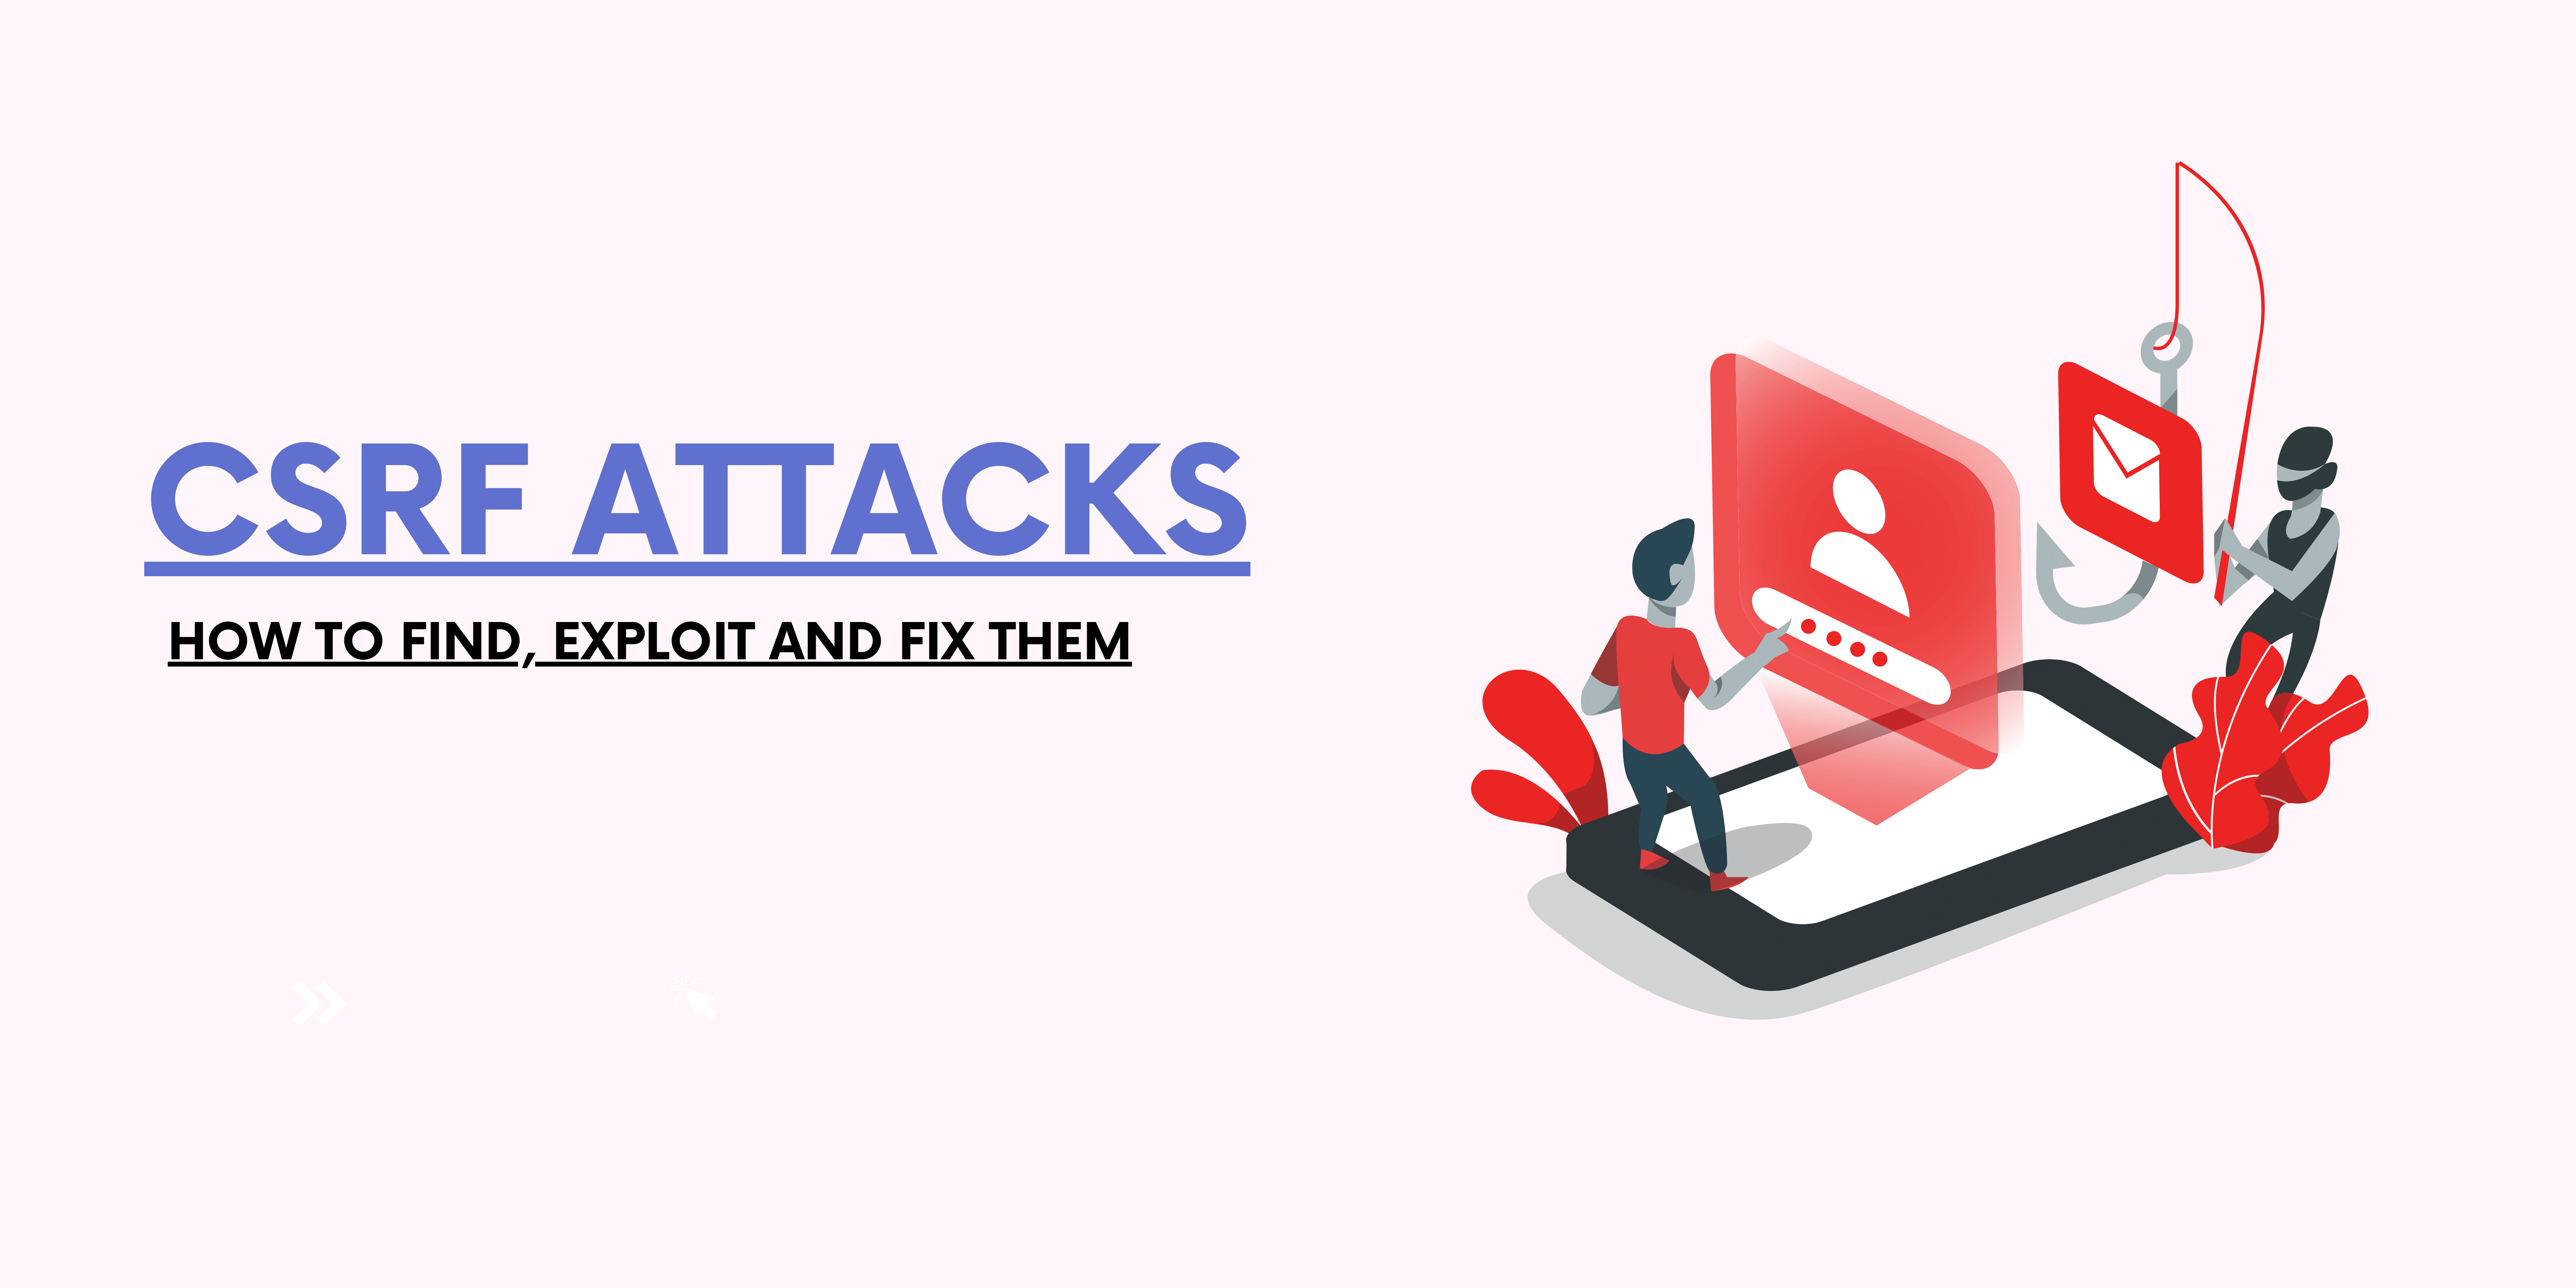 CSRF Attacks - How to Find, Exploit and fix them